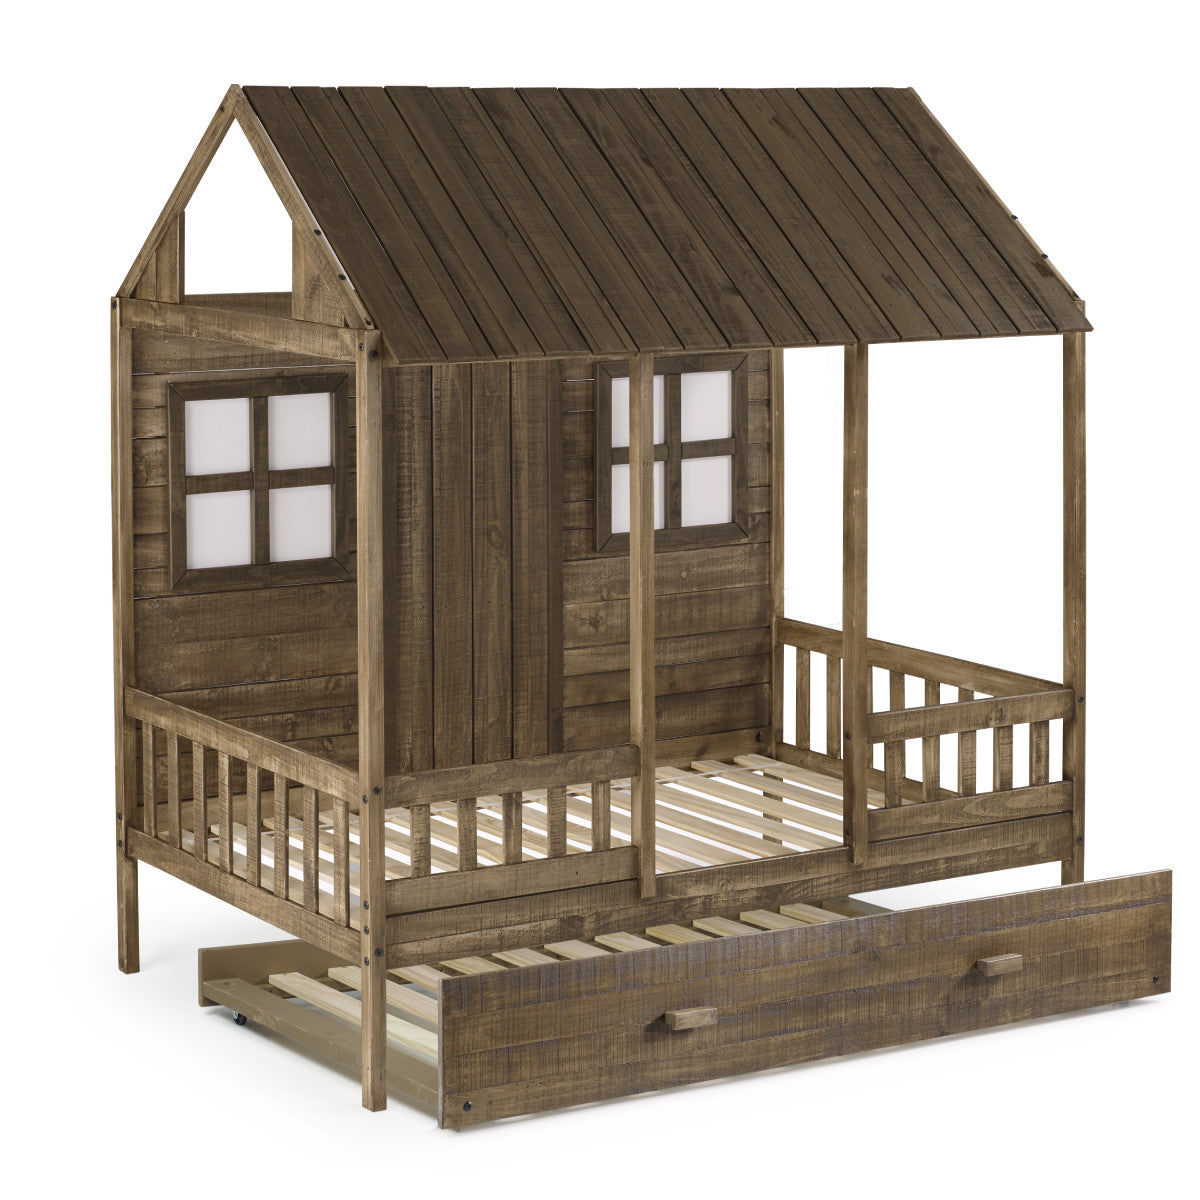 TWIN FRONT PORCH LOW LOFT IN RUSTIC DRIFTWOOD FINISH W/TWIN TRUNDLE BED